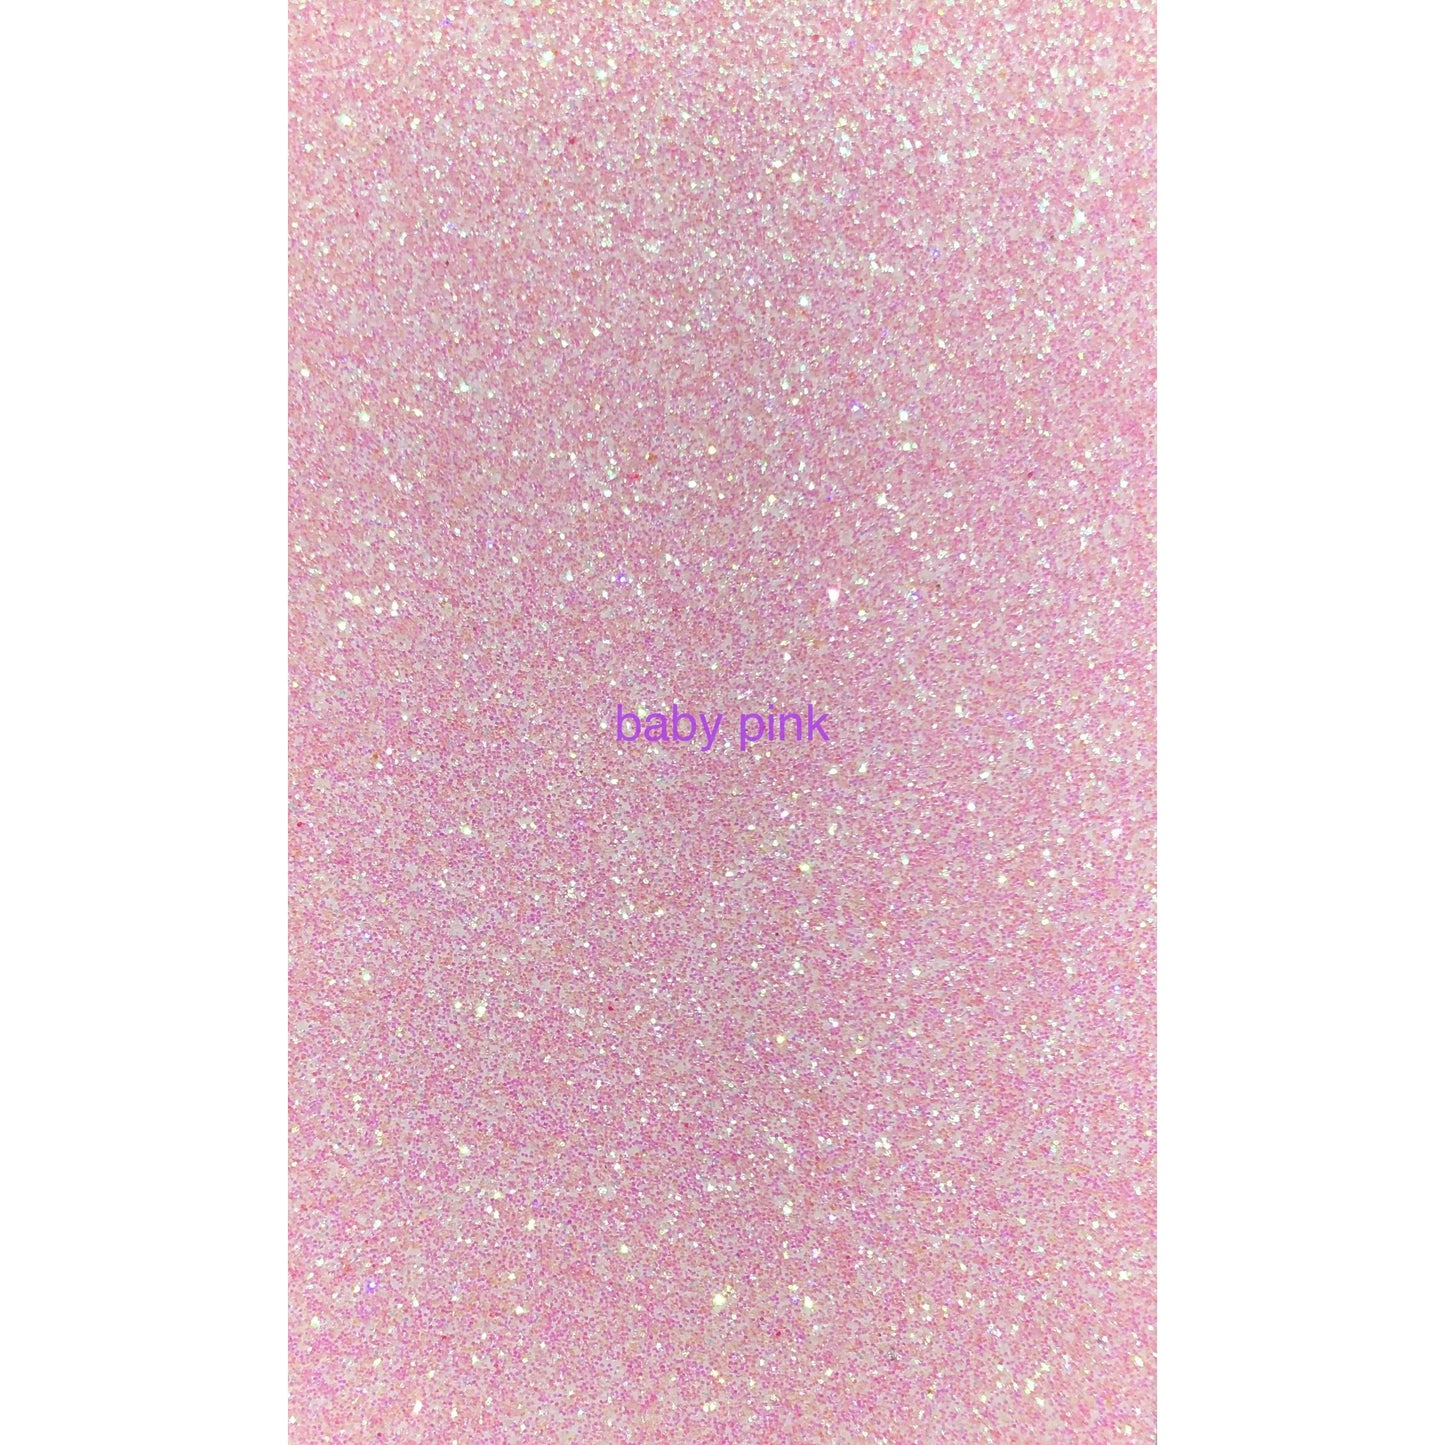 Glitter CARD  A4 20 Sheets - glitter does not come off.